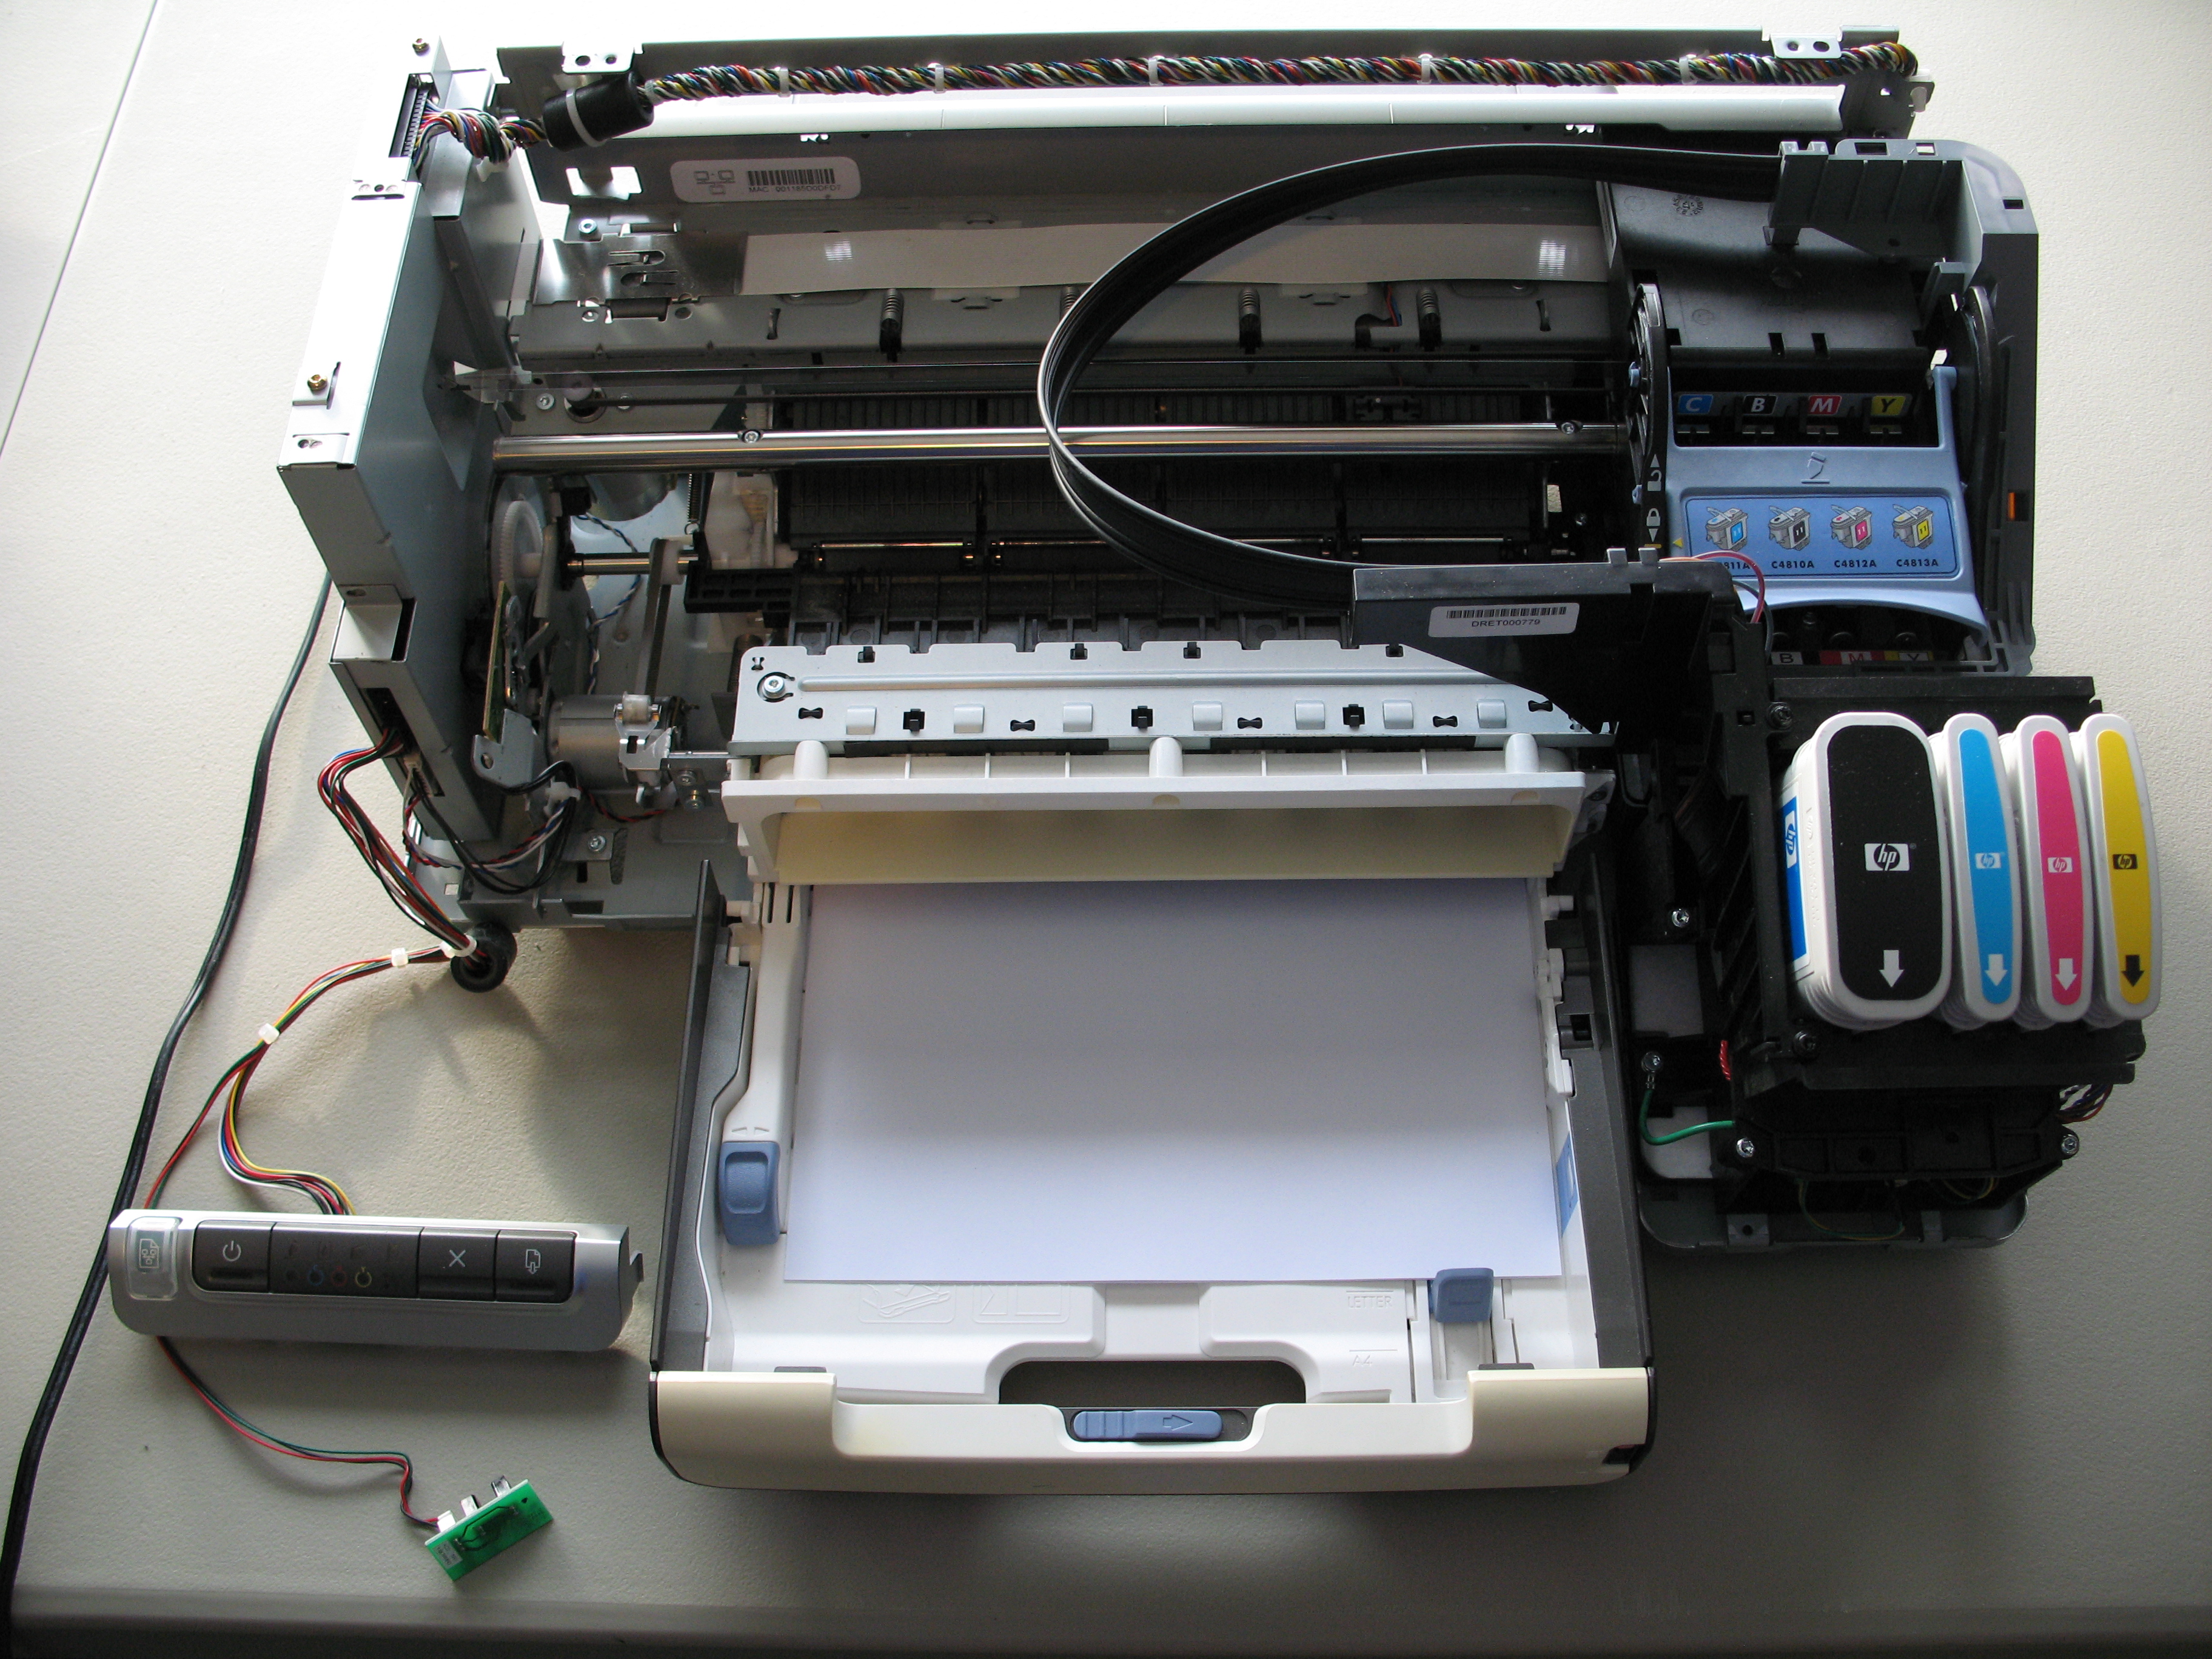 Reinstall the ink cartridges back into the printer.
Close the printer cover.